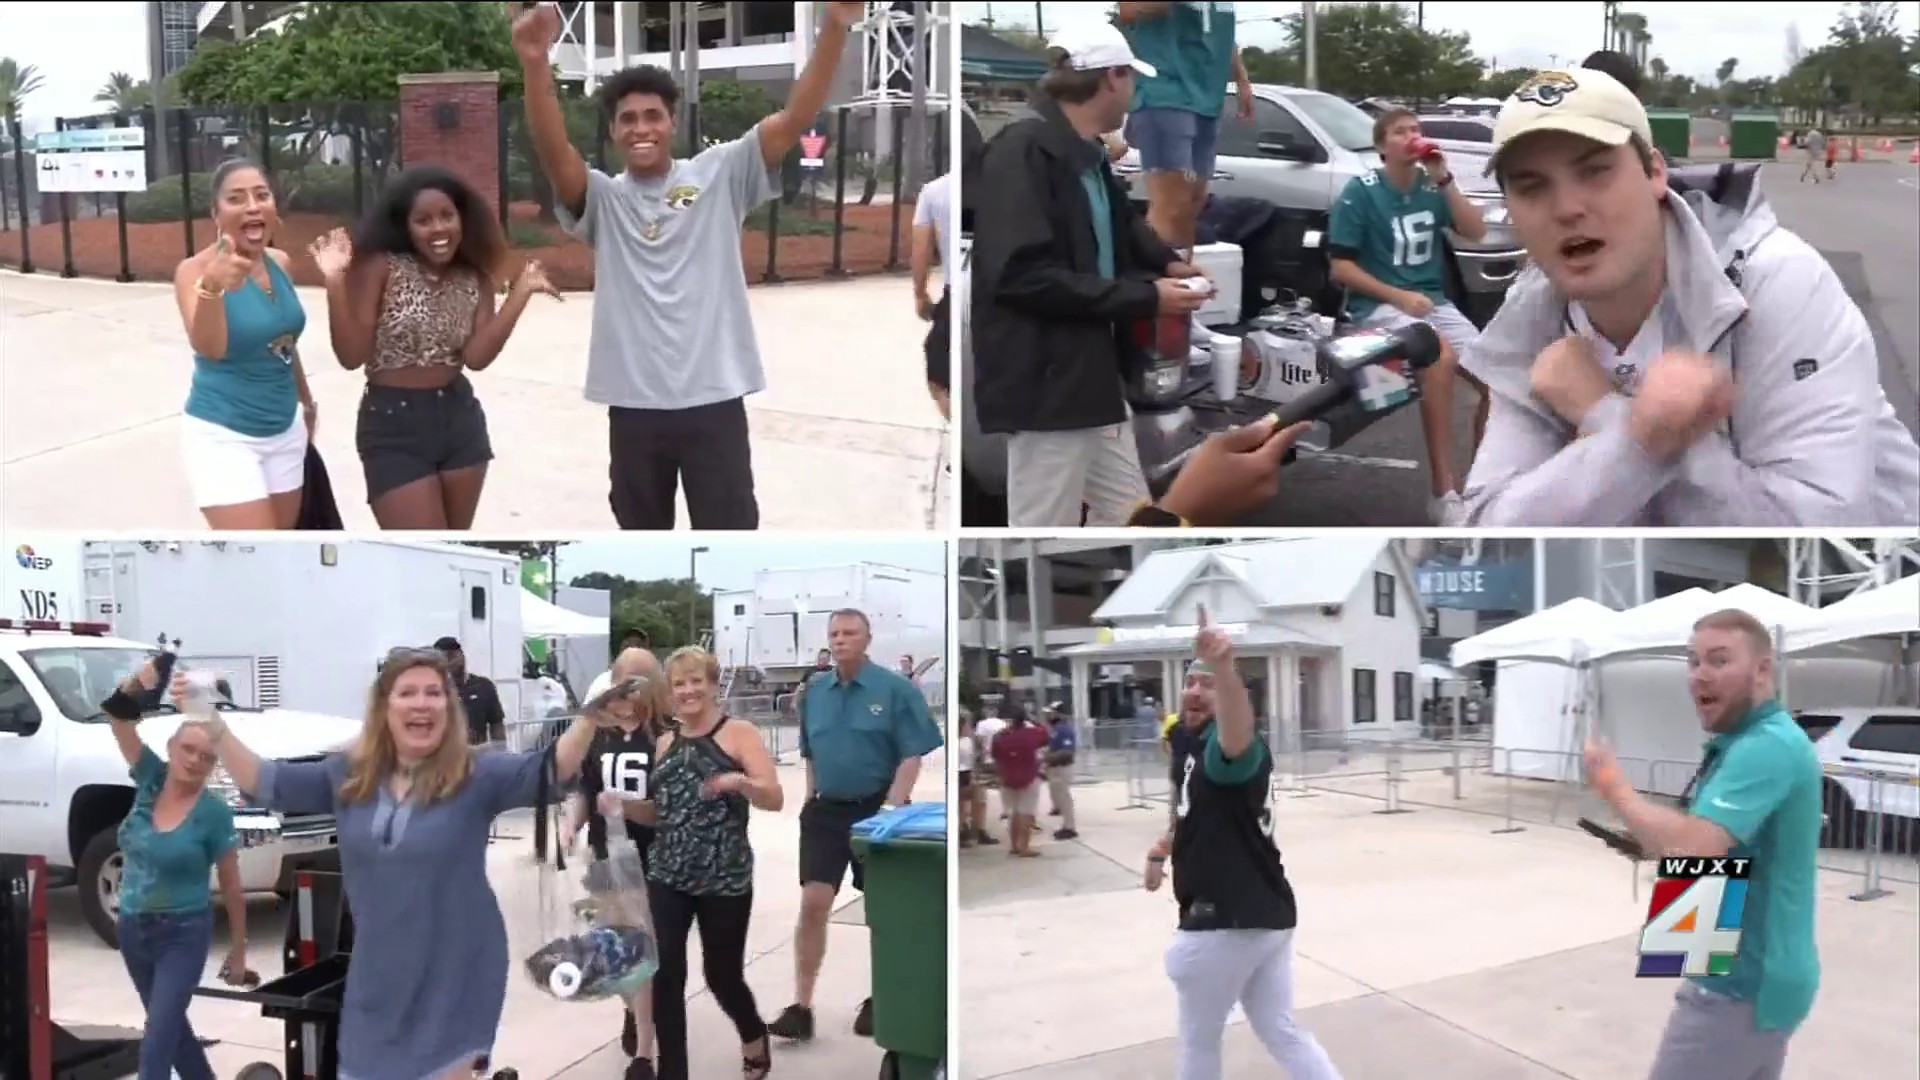 Jags fans enjoy fanfare of first game without crowd restrictions